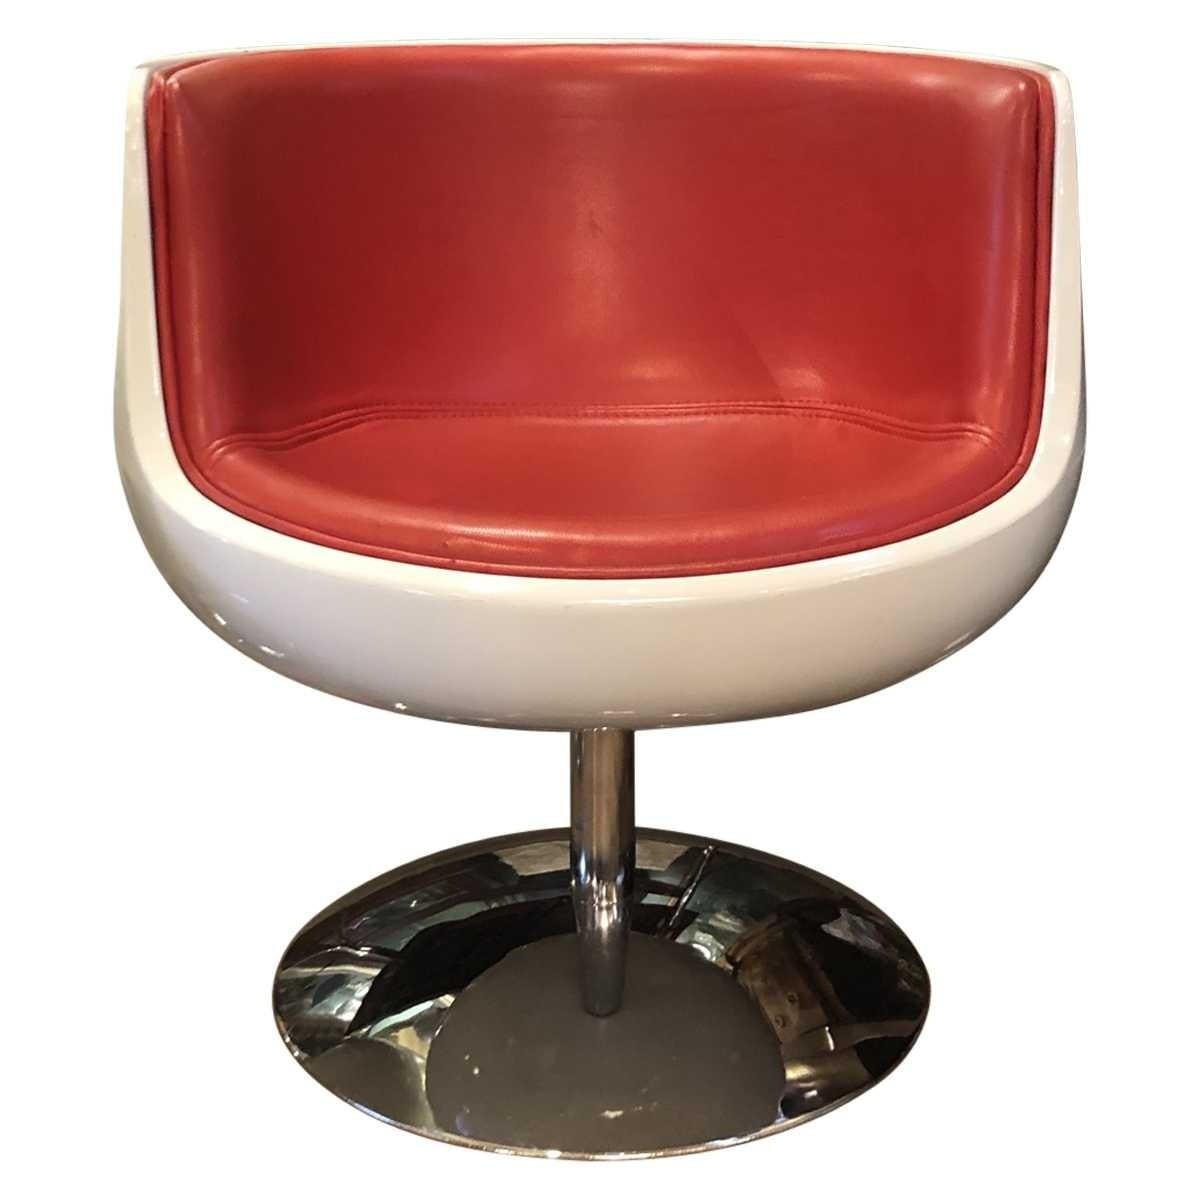 Modern Eero Aarnio Contemporary Red Leather, Cognac and Chrome Swivel Chairs